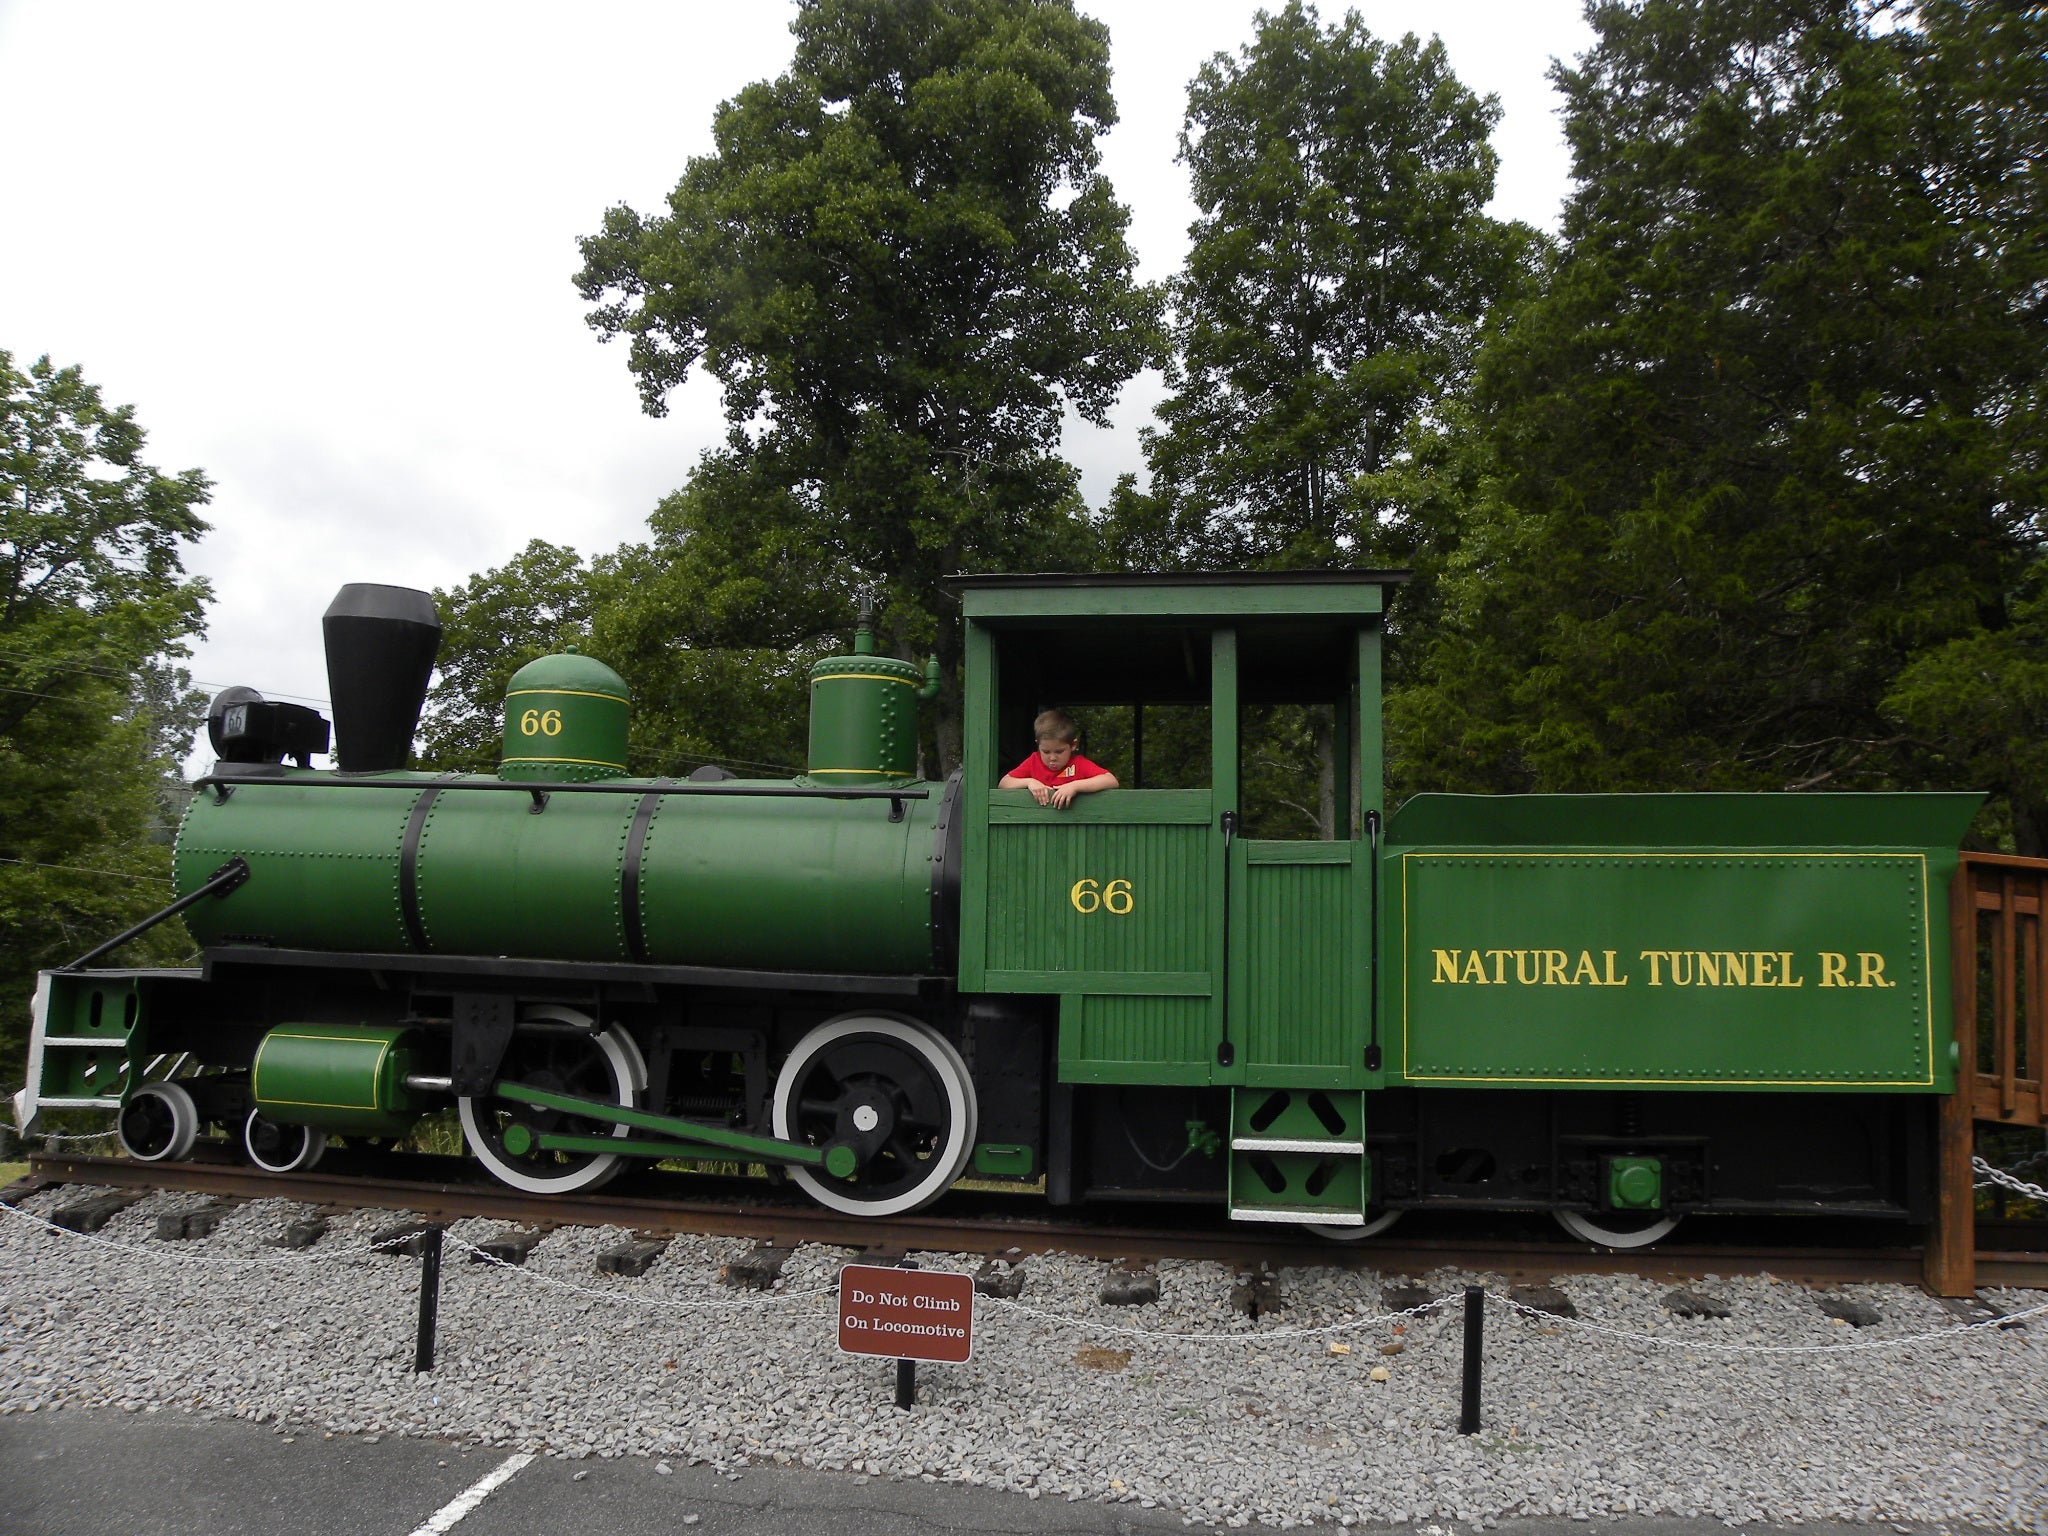 This train was close to the visitor's center.